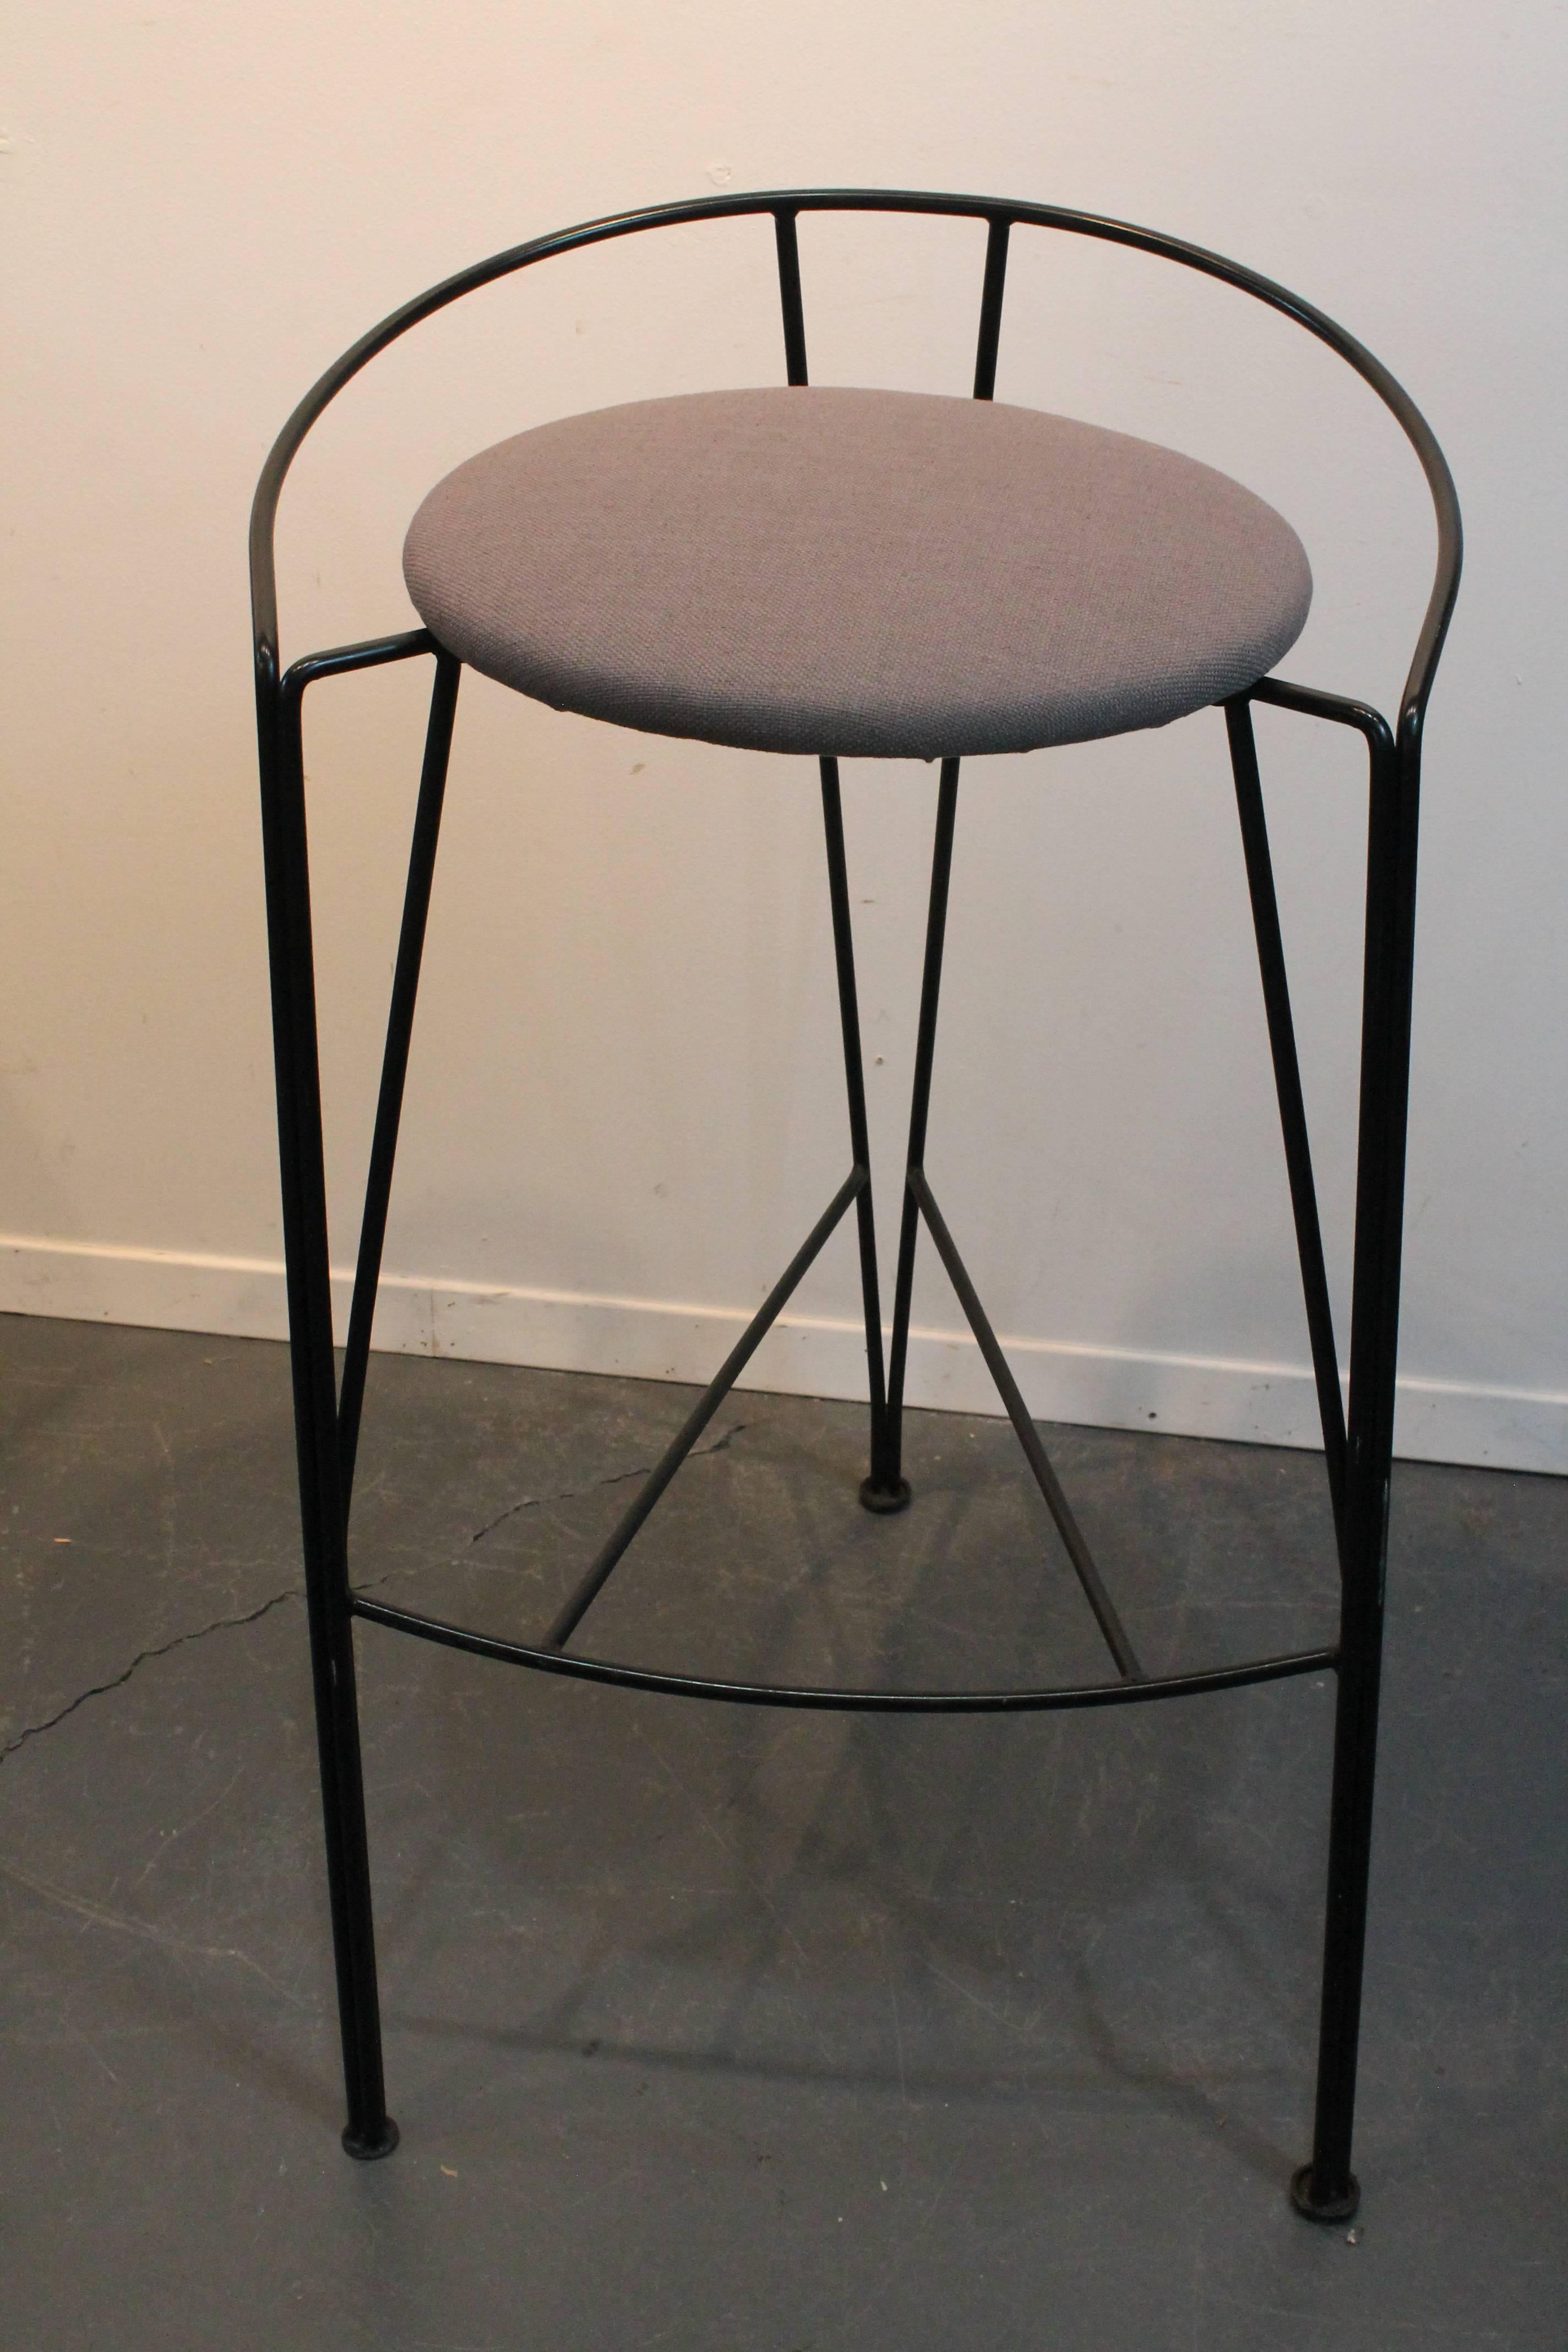 Wonderful minimalist sculptural iron barstools designed by French furniture designer and architect Pascal Mourgue and manufactured by Vecta (now Steelcase).
 